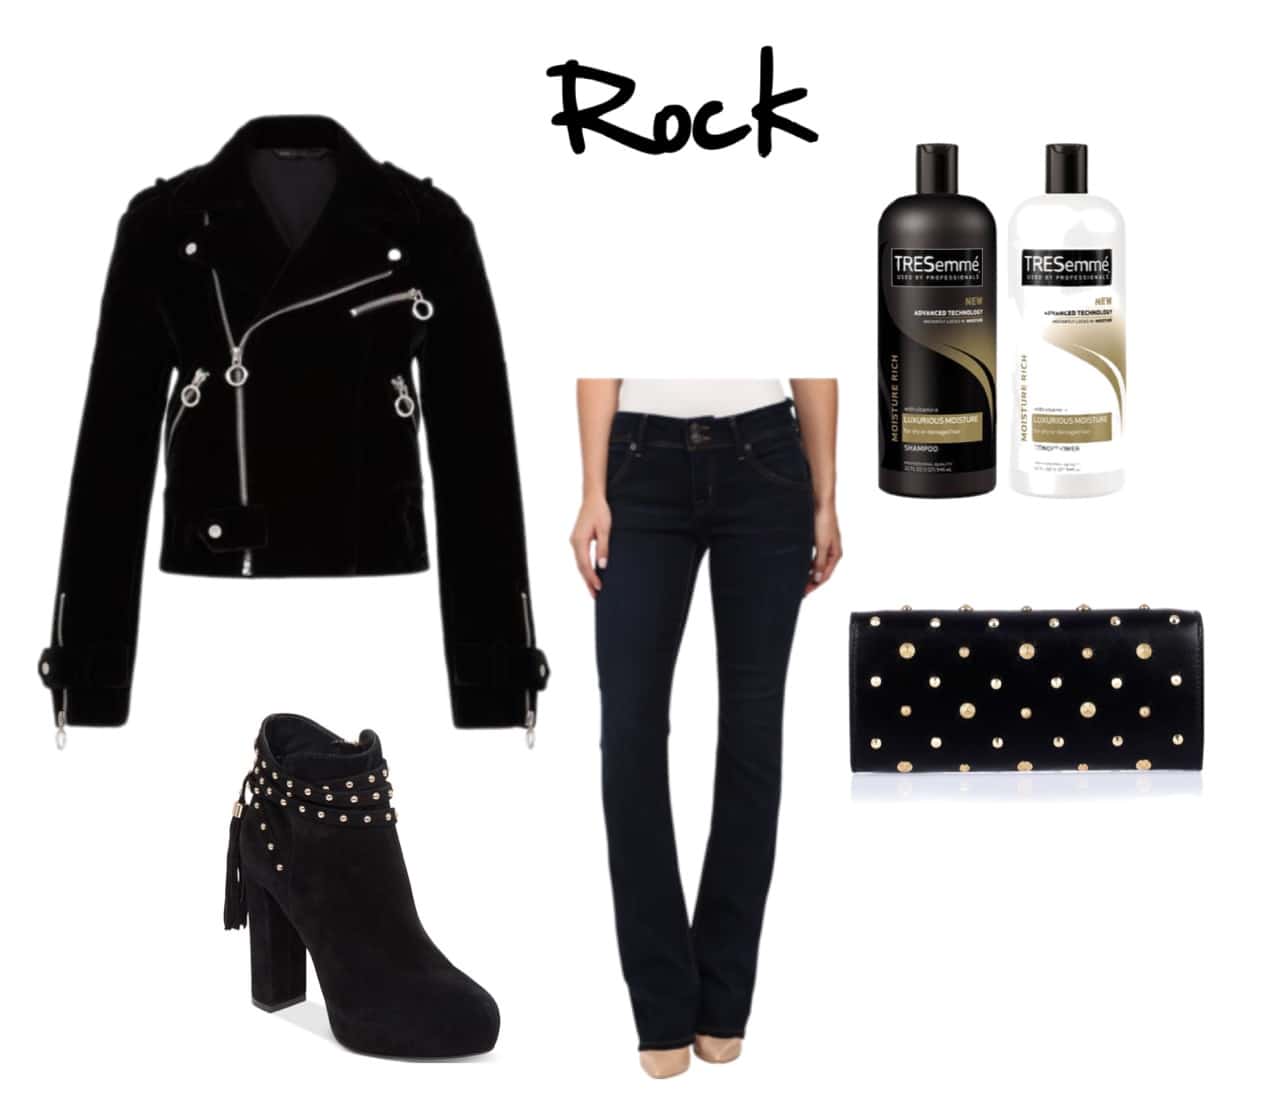 Let Music (Especially Rock!) Inspire Your Look Of The Day